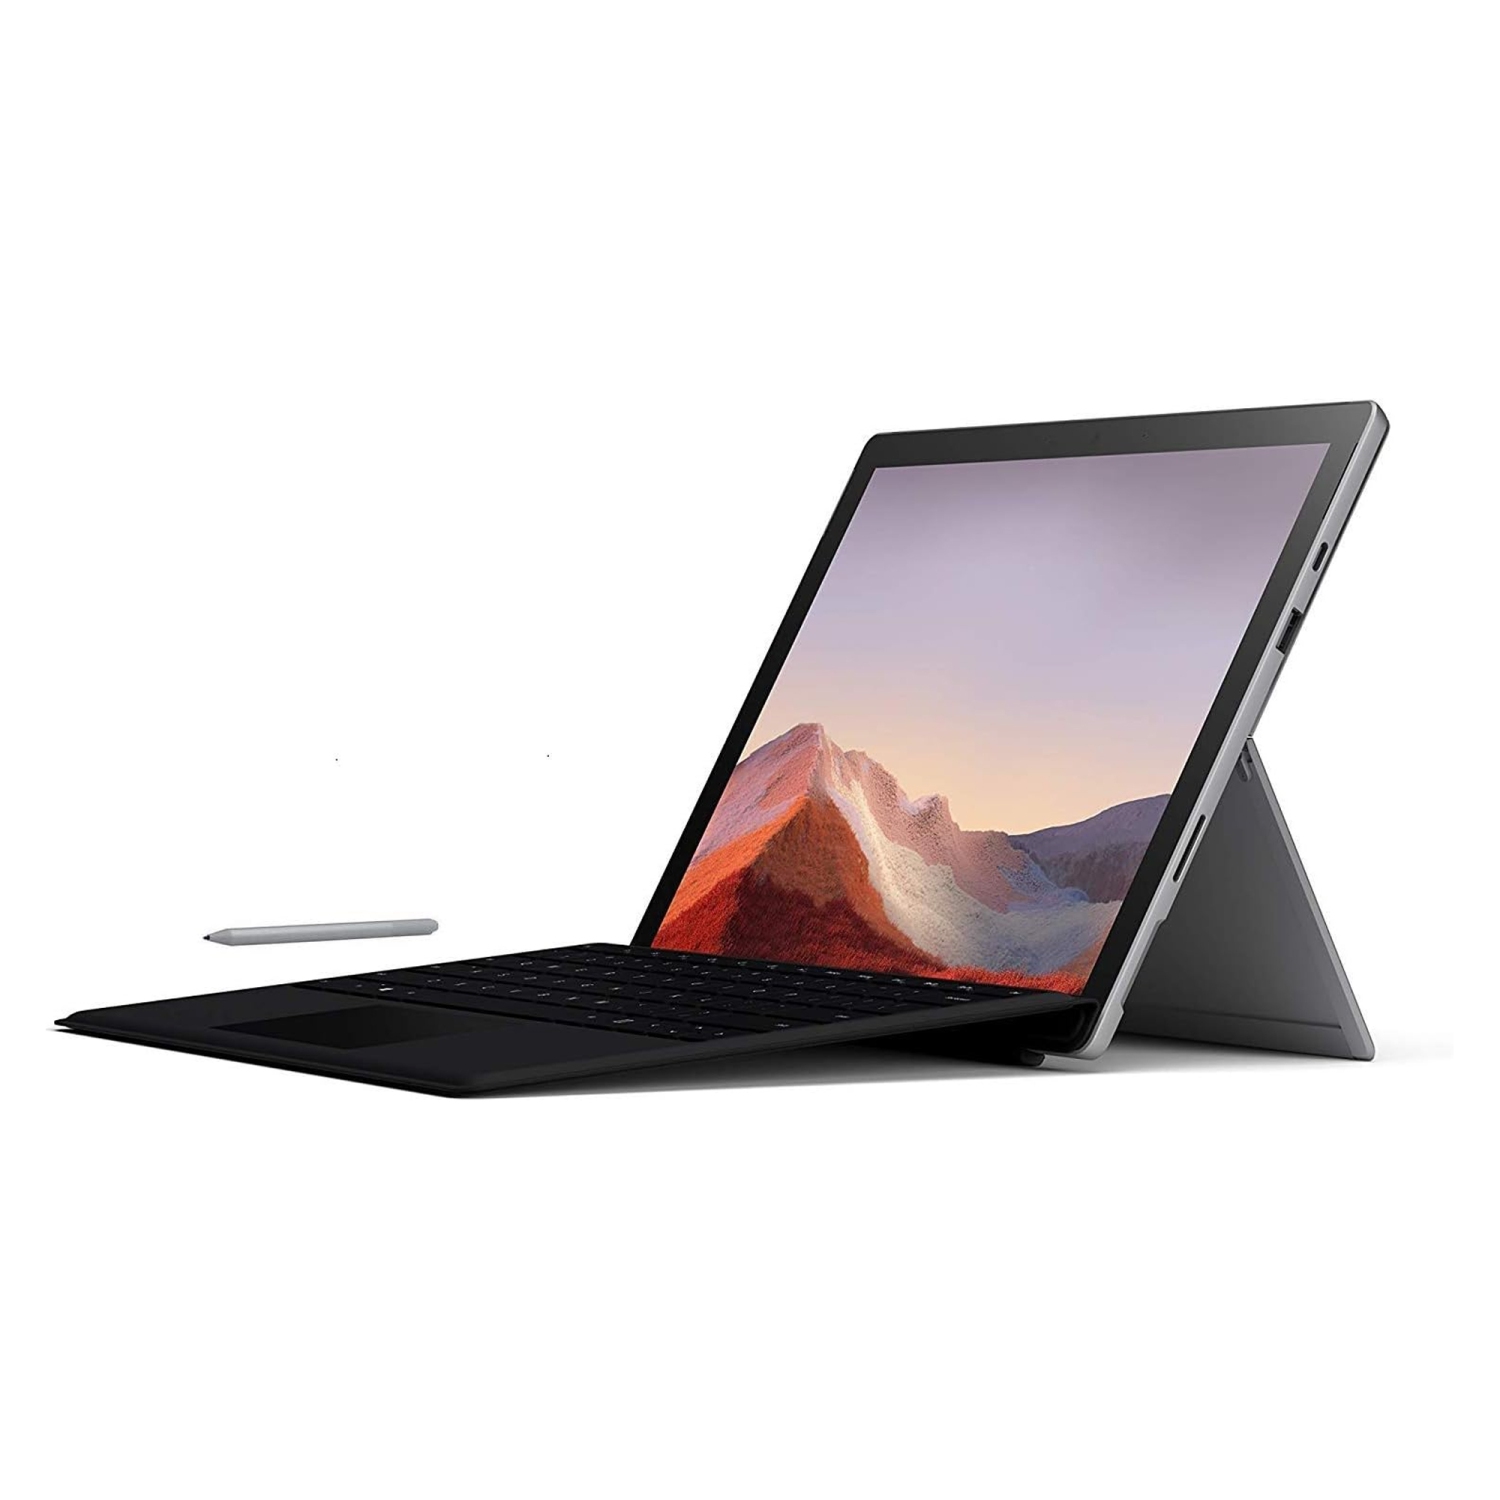 Open Box - Microsoft New Surface Pro 7 Bundle: 10th Gen Intel Core i5-1035G4, 8GB RAM, 128GB SSD (Latest Model) Platinum with Black Type Cover and Surface Pen, 12.3" (Open Box)